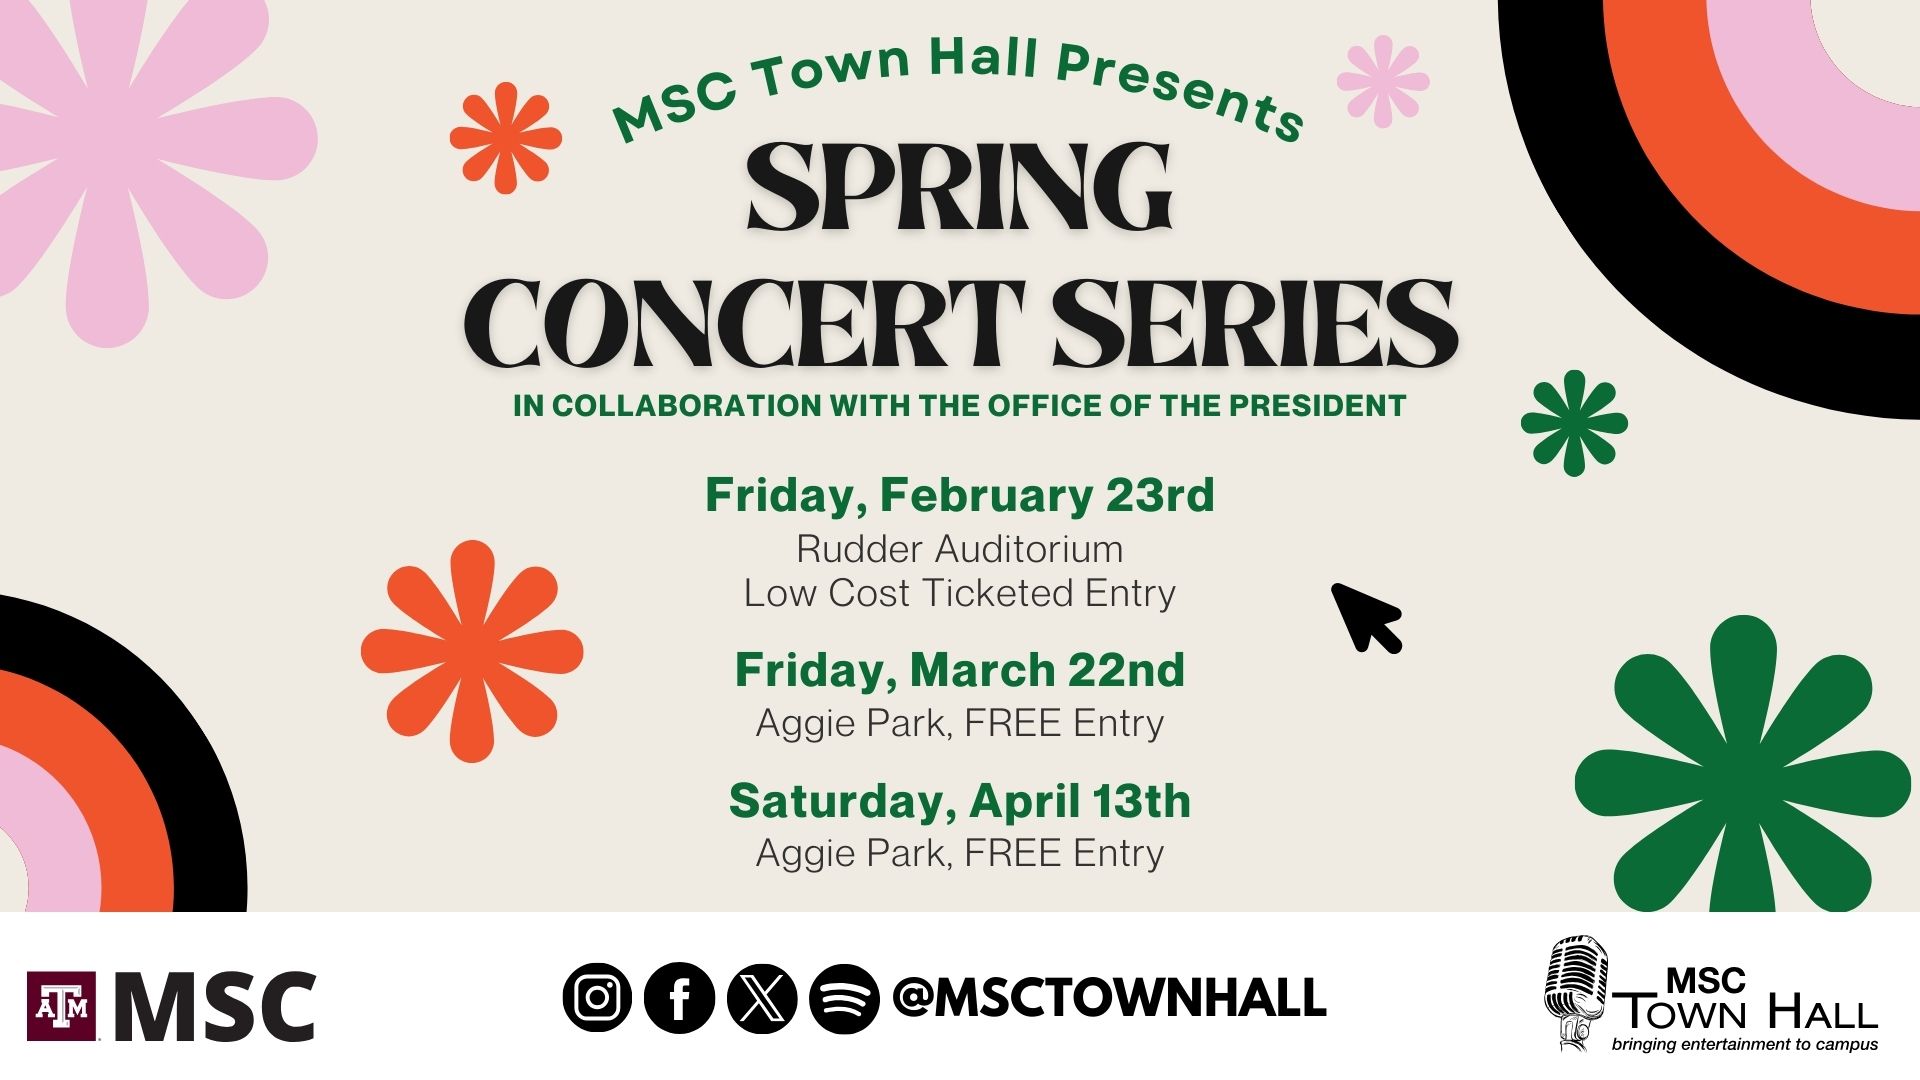 MSC Town Hall Presents Spring Concert Series in collaboration with the office of the President. Friday, February 23rd, Rudder Auditorium, low cost ticketed entry. Friday, March 22nd Aggie Park, Free Entry. Saturday, April 13th, AggiePark, Free Entry. Instagram , Facebook, X, Spotify @msctownhall